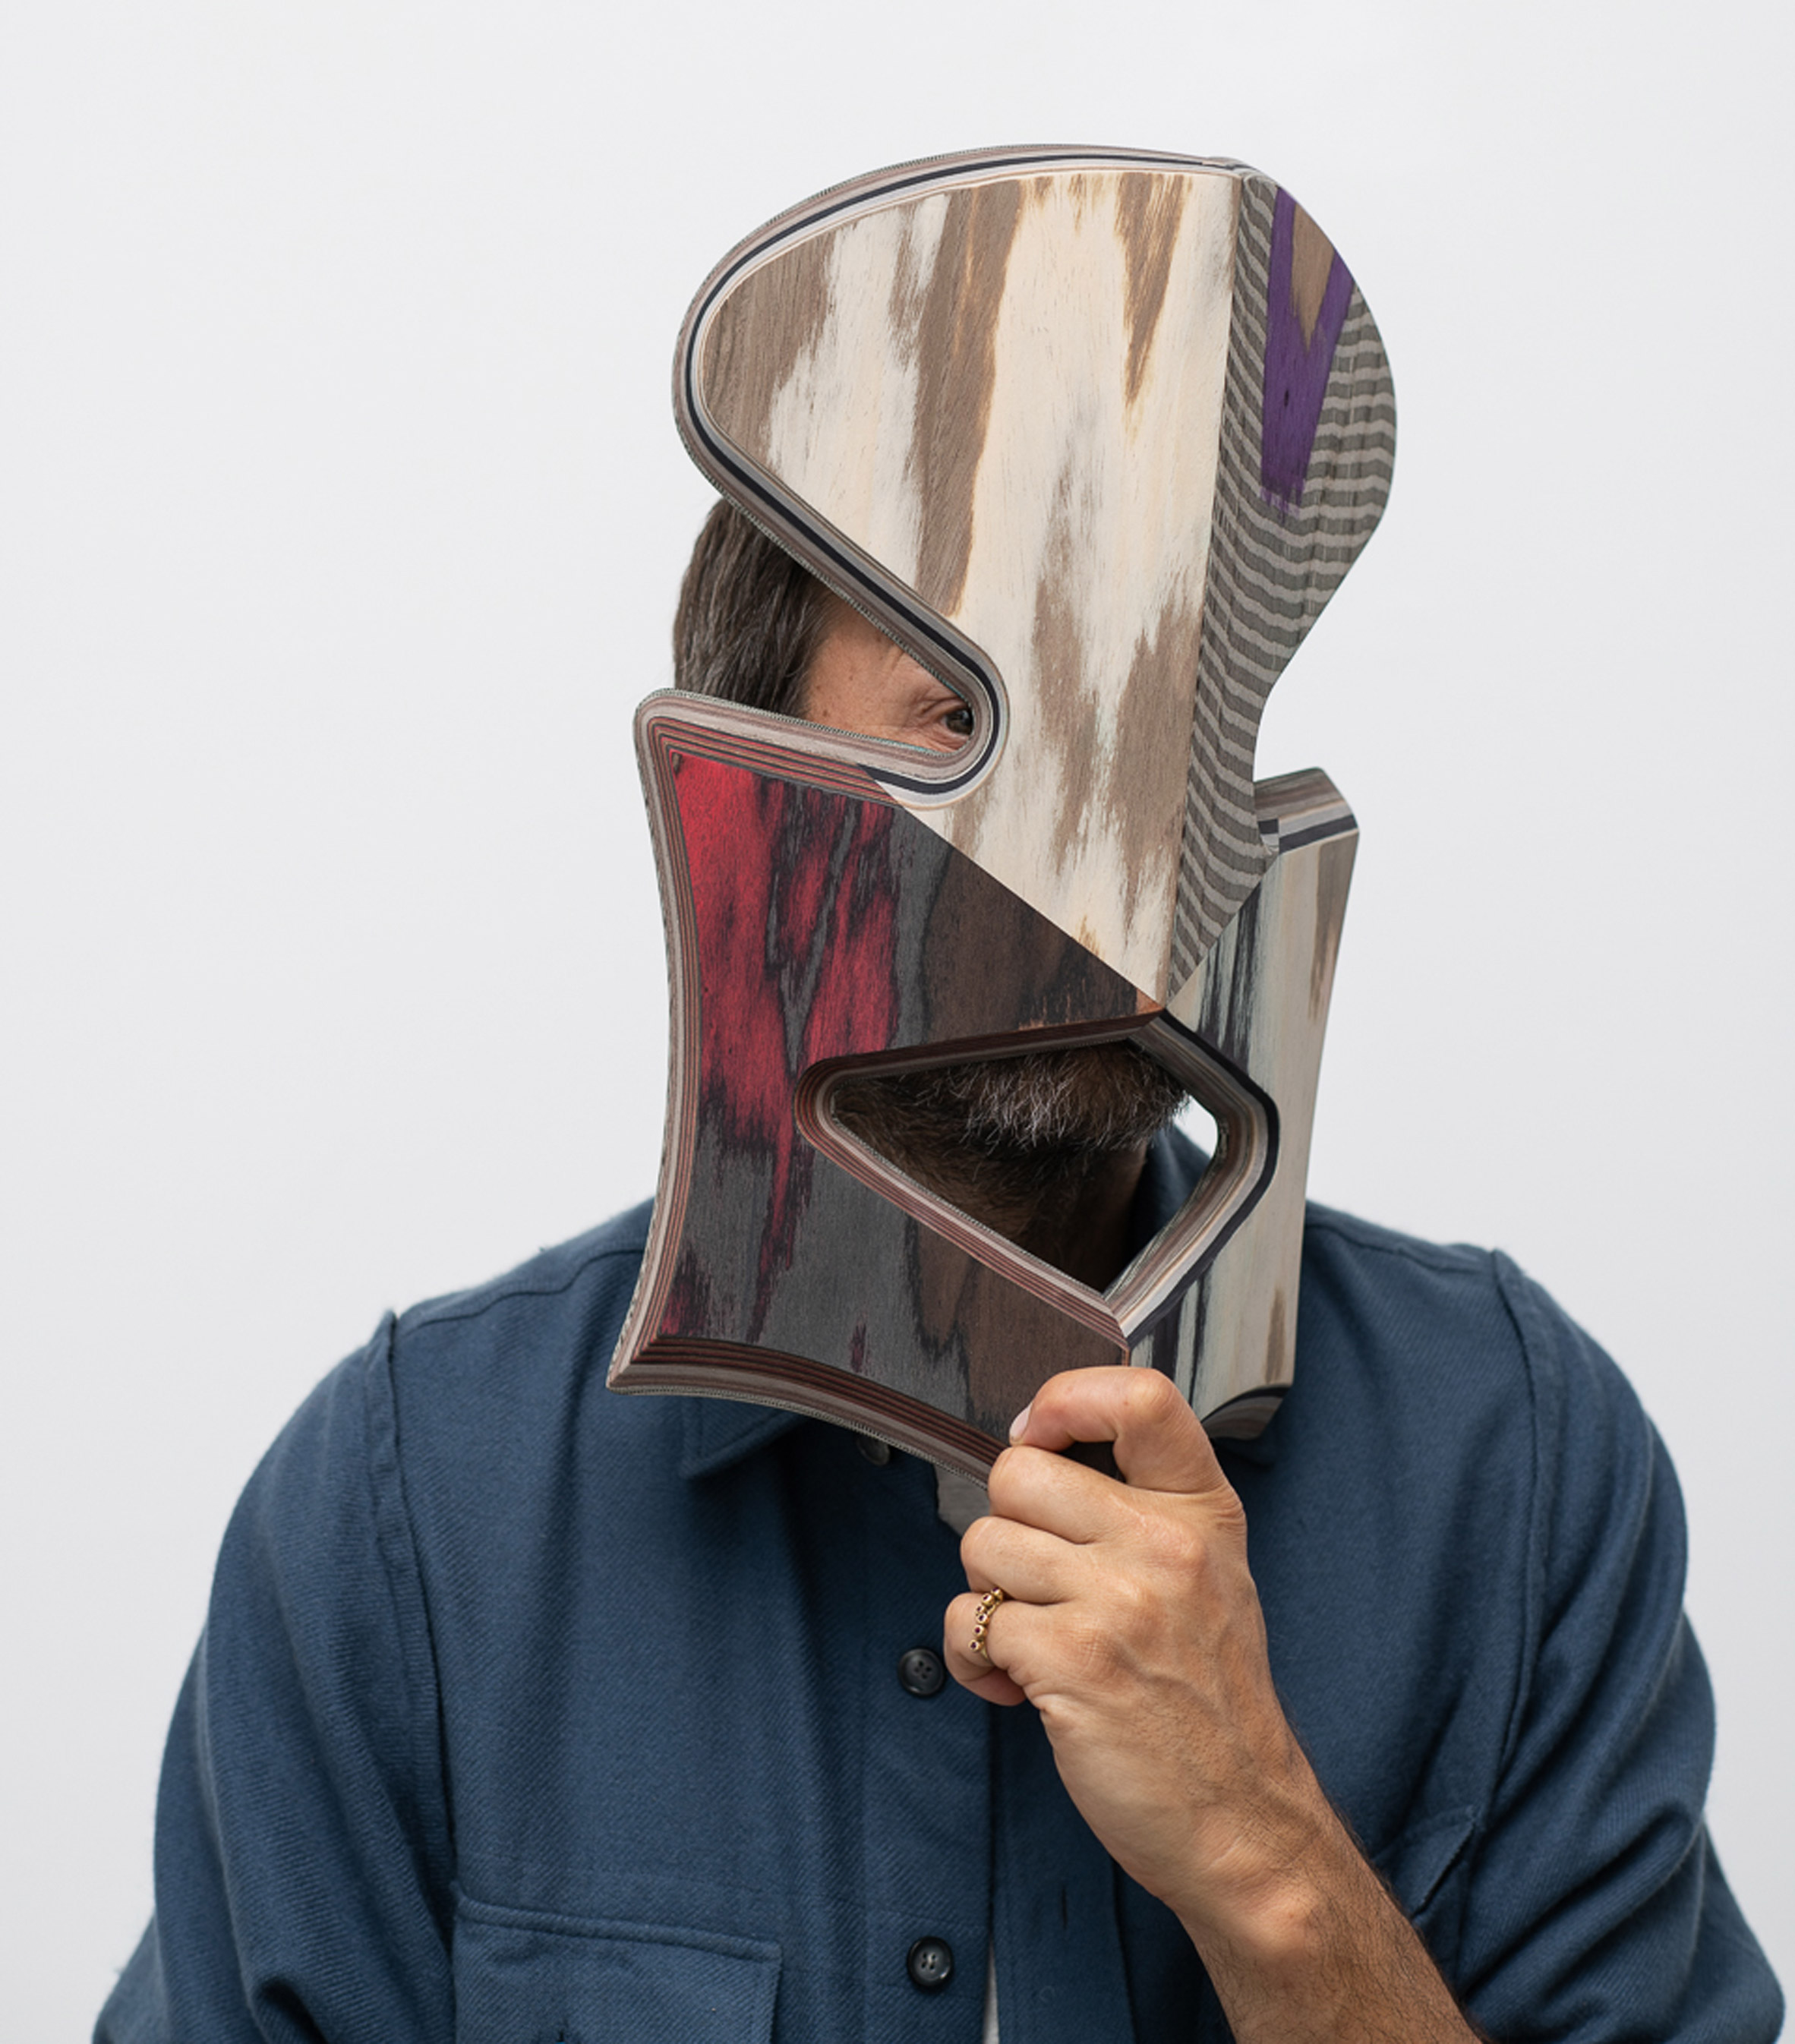 Masters of Disguise masks: Martino Gamper